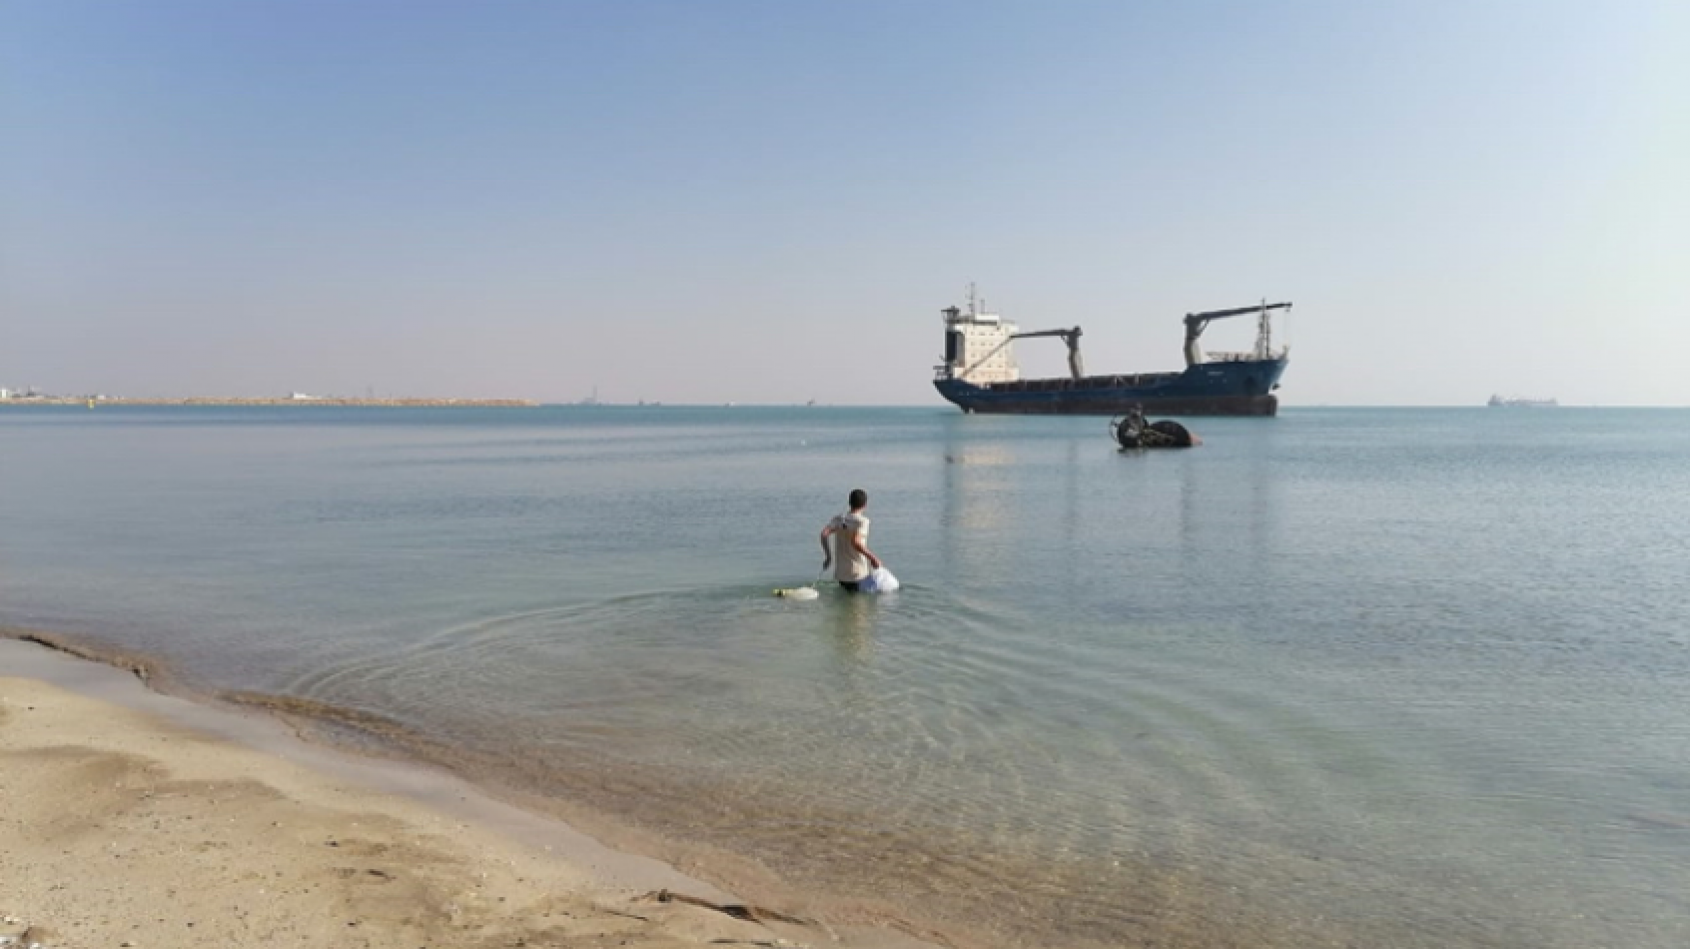 Mohammad Aisha had to swim to charge his phone and get food during his time trapped on the abandoned MV Aman